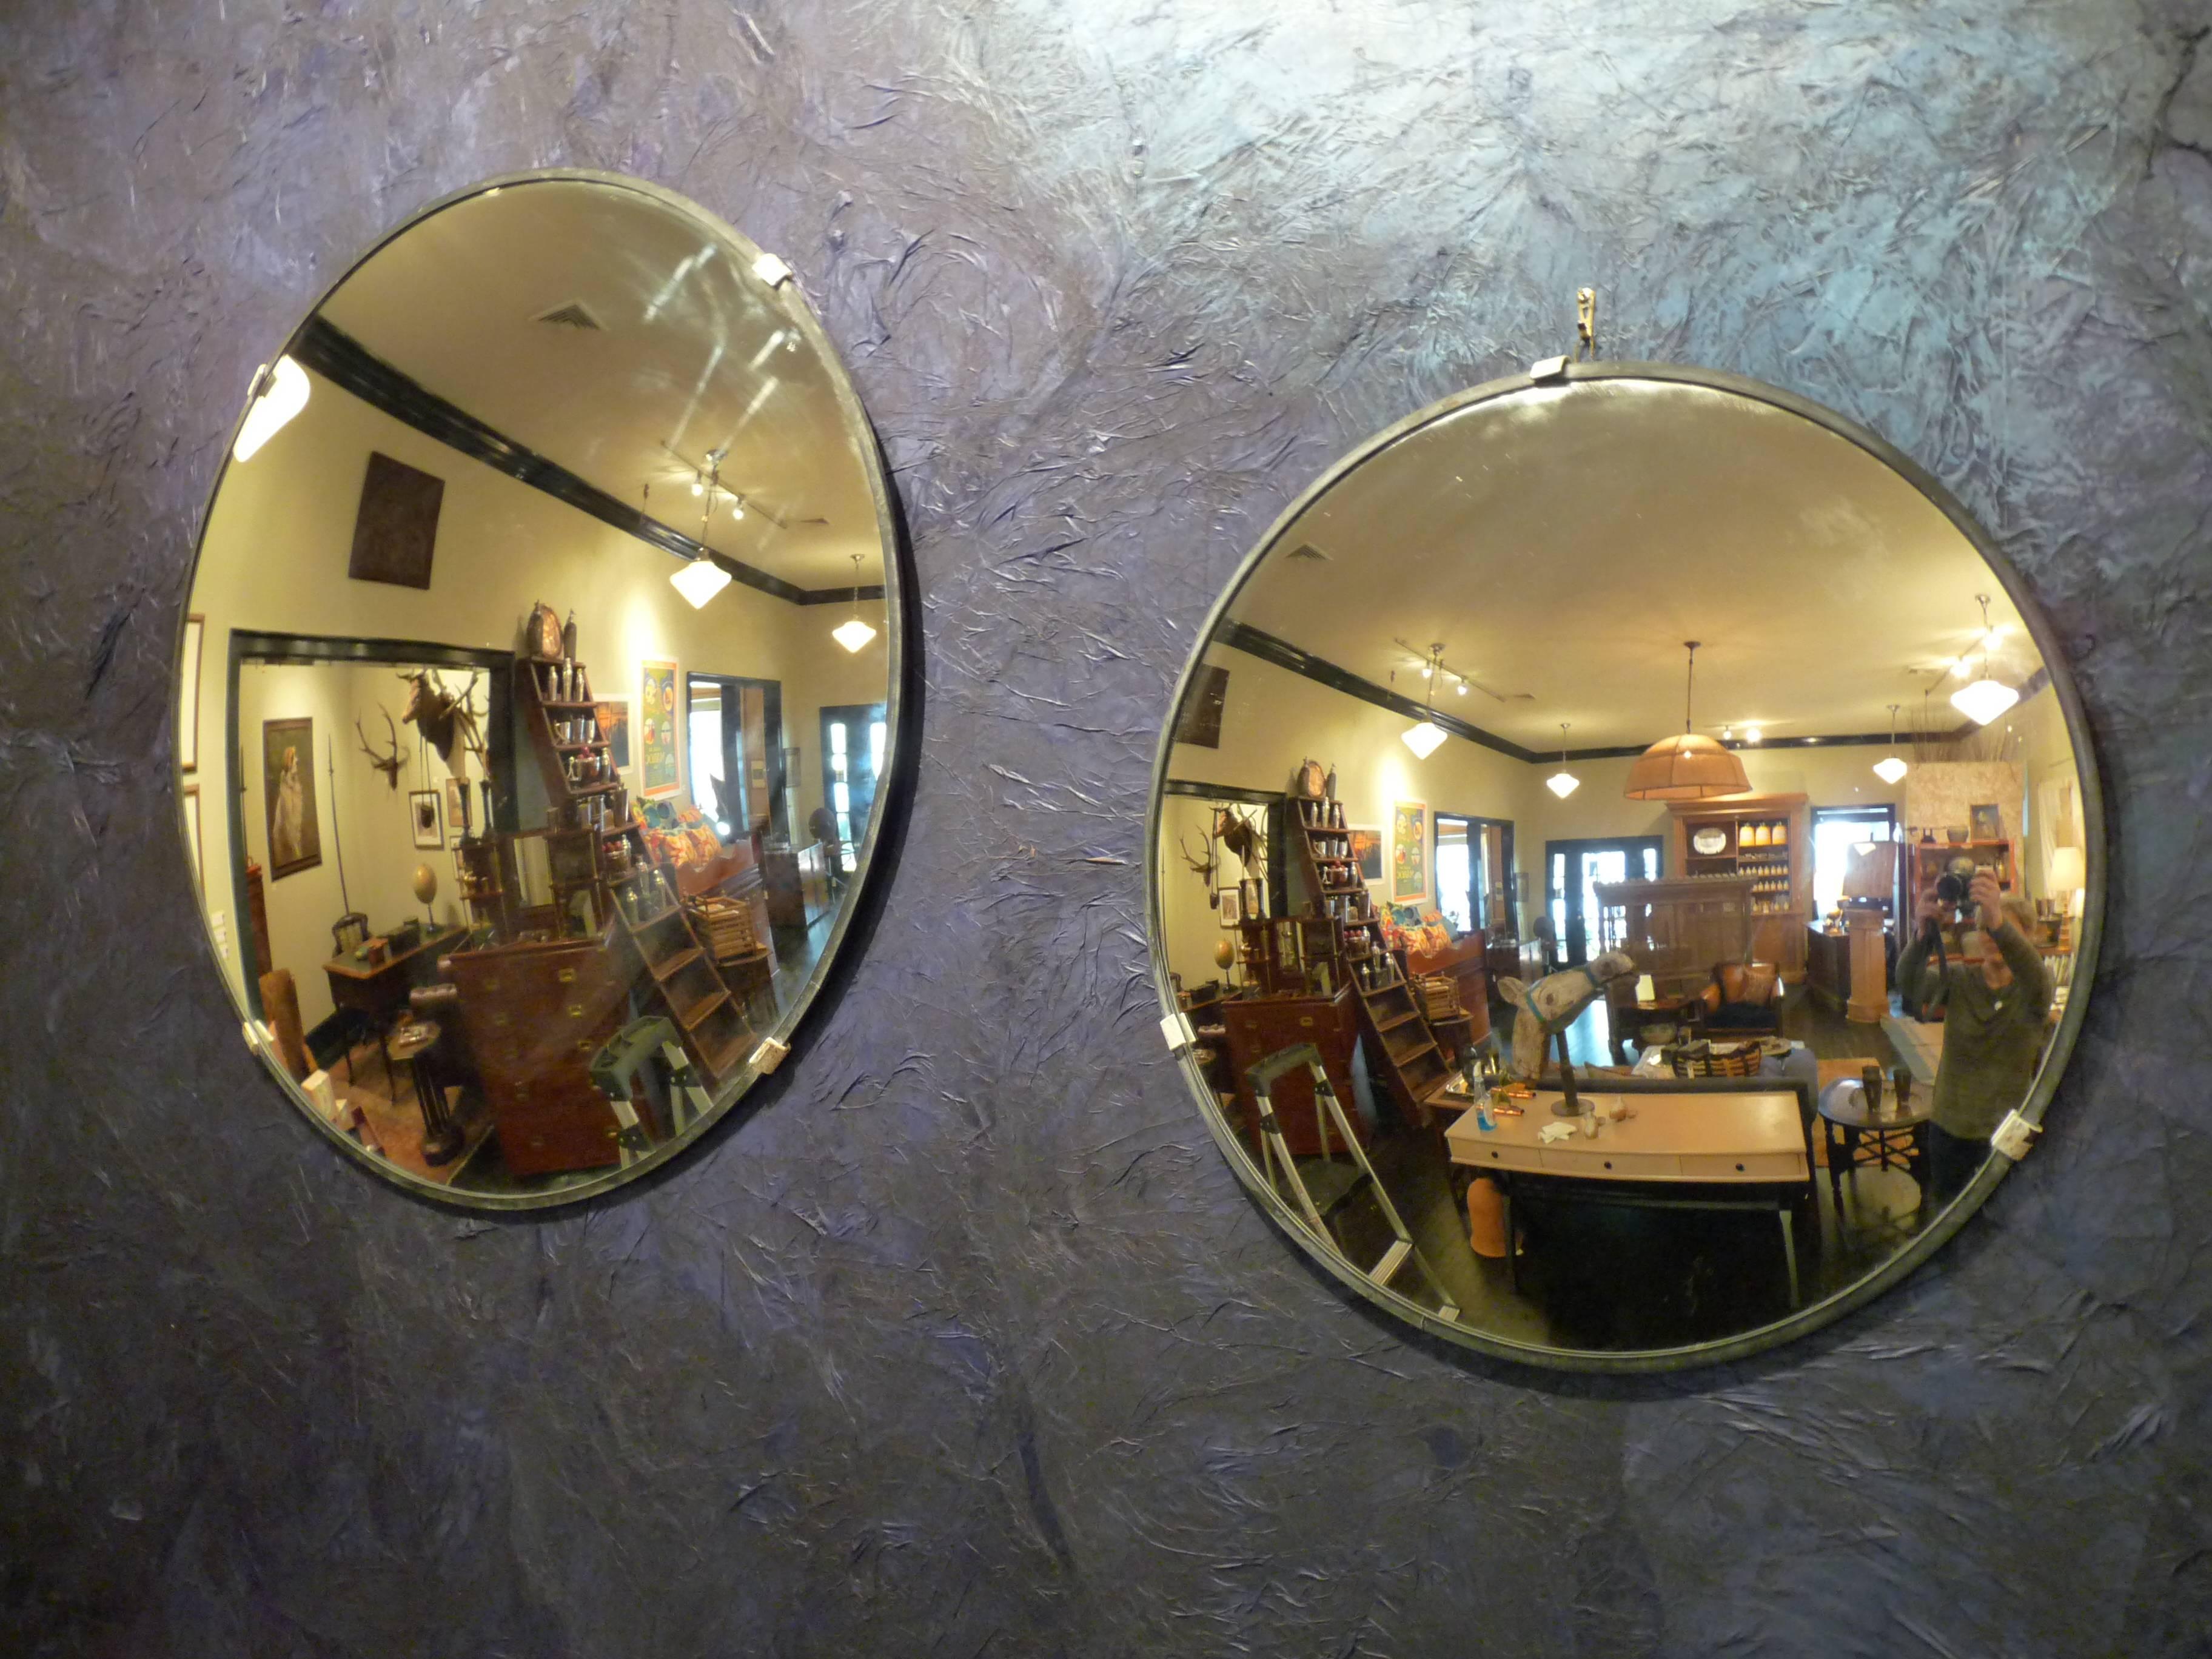 Instant fun in a room. We have two of these fantastic convex mirrors that will add a little kick to your room. Slightly industrial in feel, a metal frame on the bag allows for easy hanging.
22